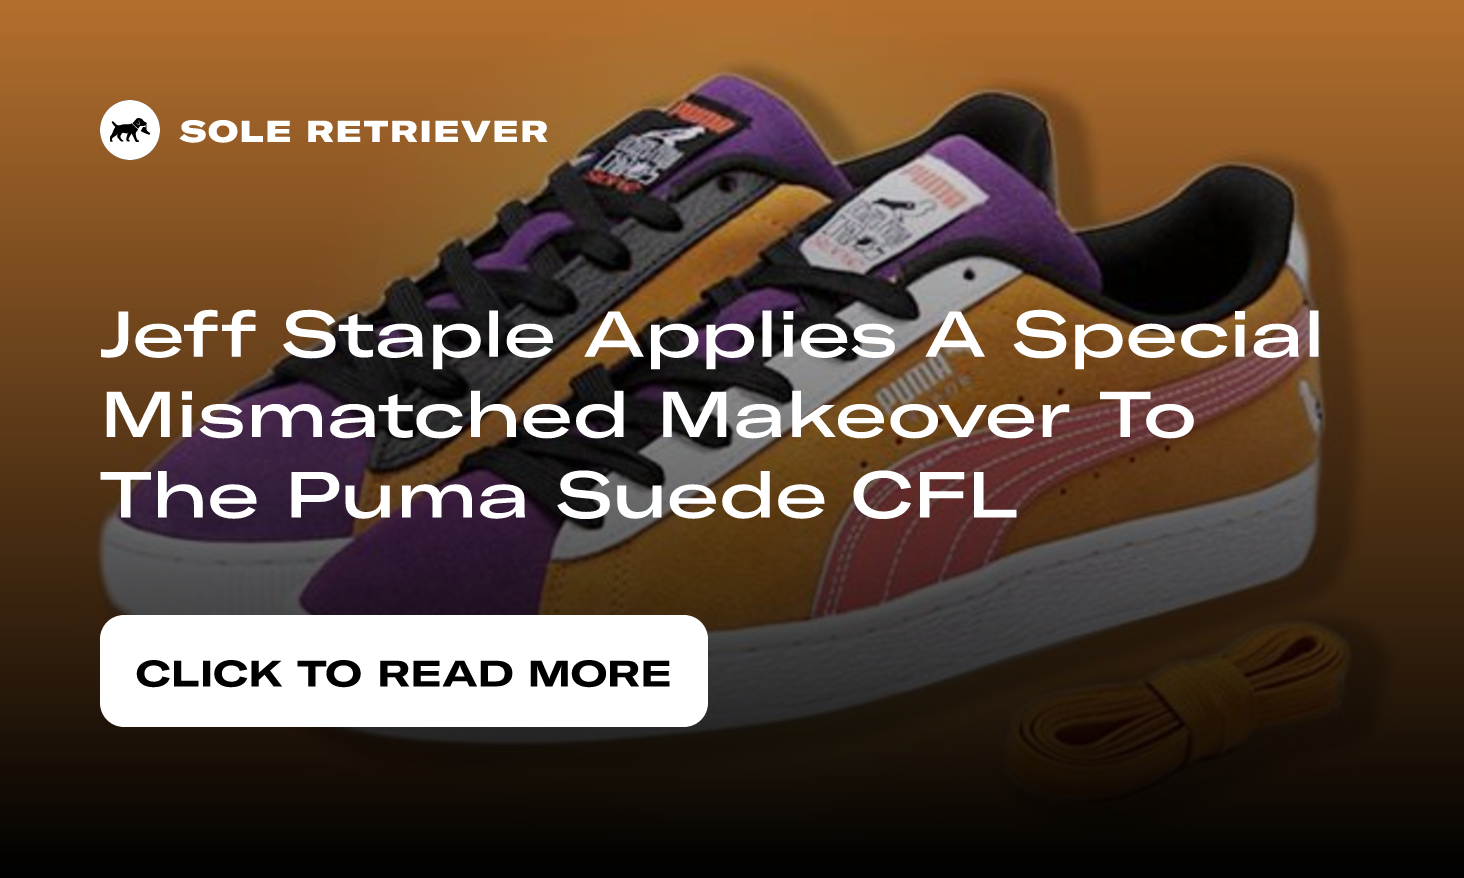 Jeff Staple Applies A Special Mismatched Makeover To The